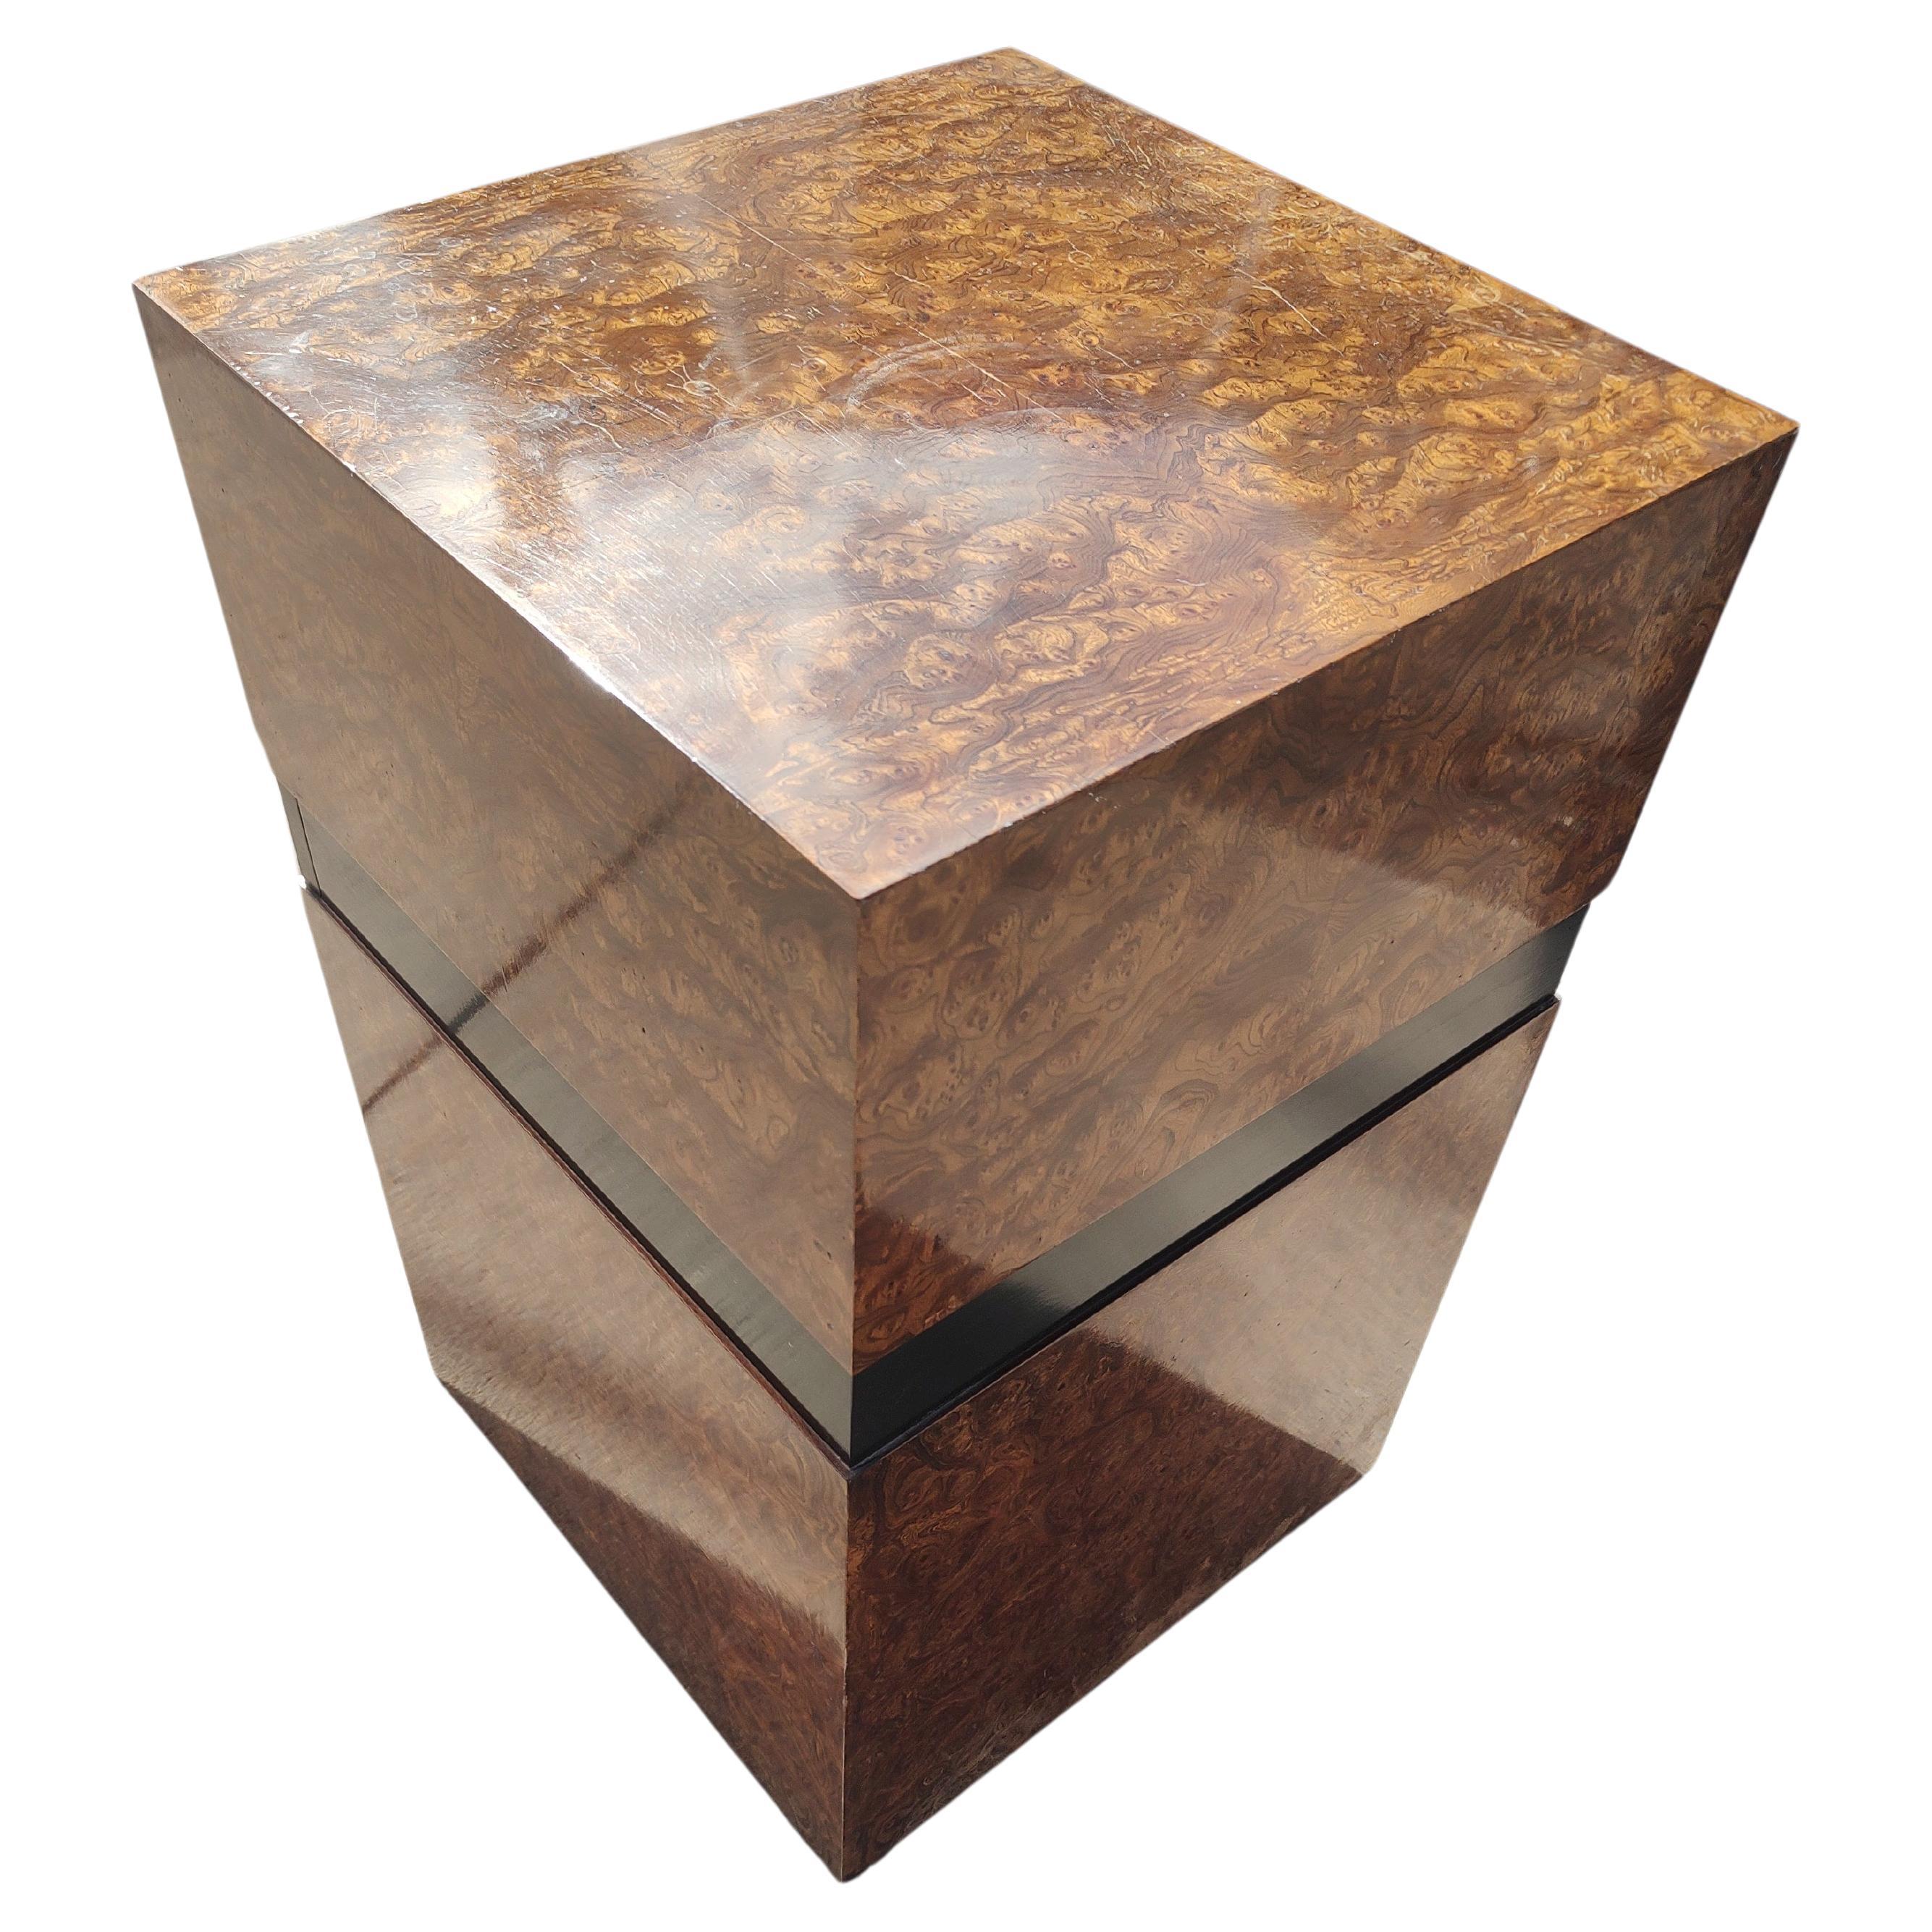 American Mid Century Modern Burled Olivewood Cube Table Attributed to Milo Baughman 1975  For Sale